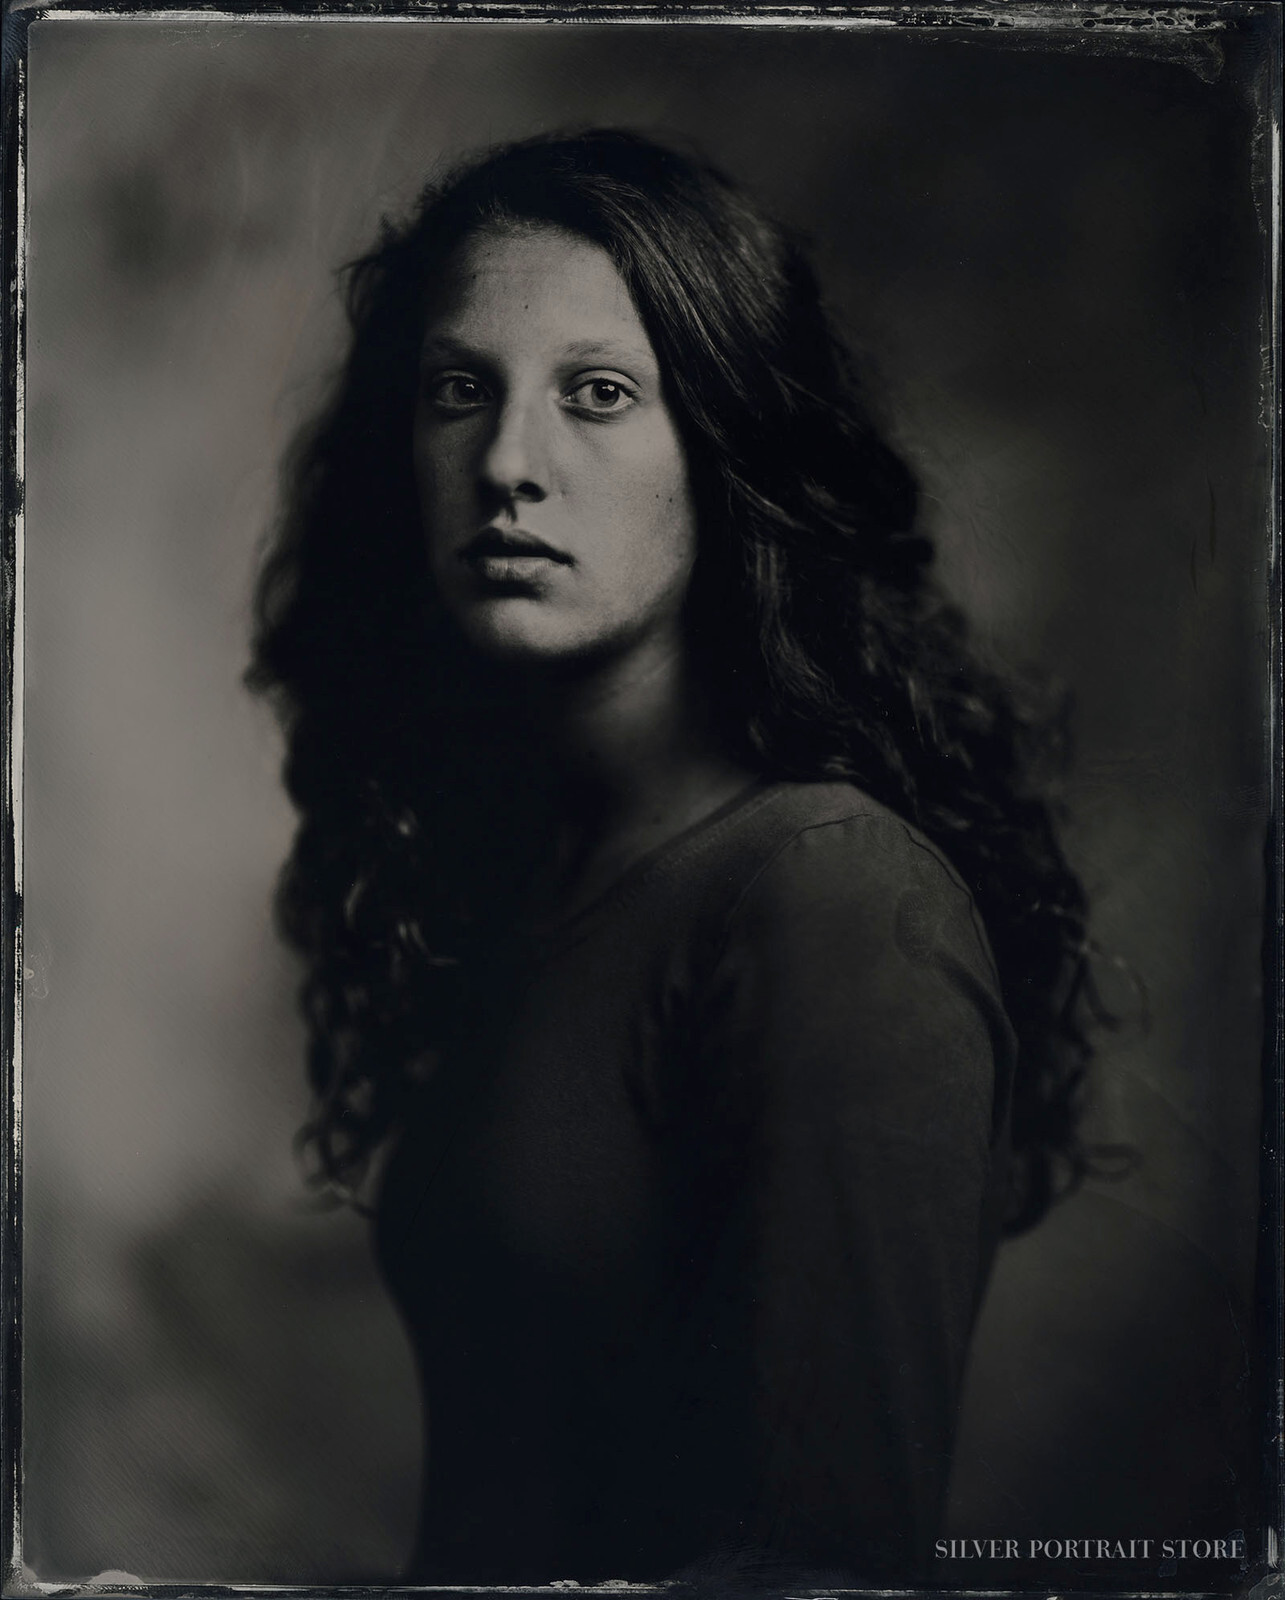 Lois-Silver Portrait Store-scan from Wet plate collodion-Clear glass Ambrotype 20 x 25 cm.